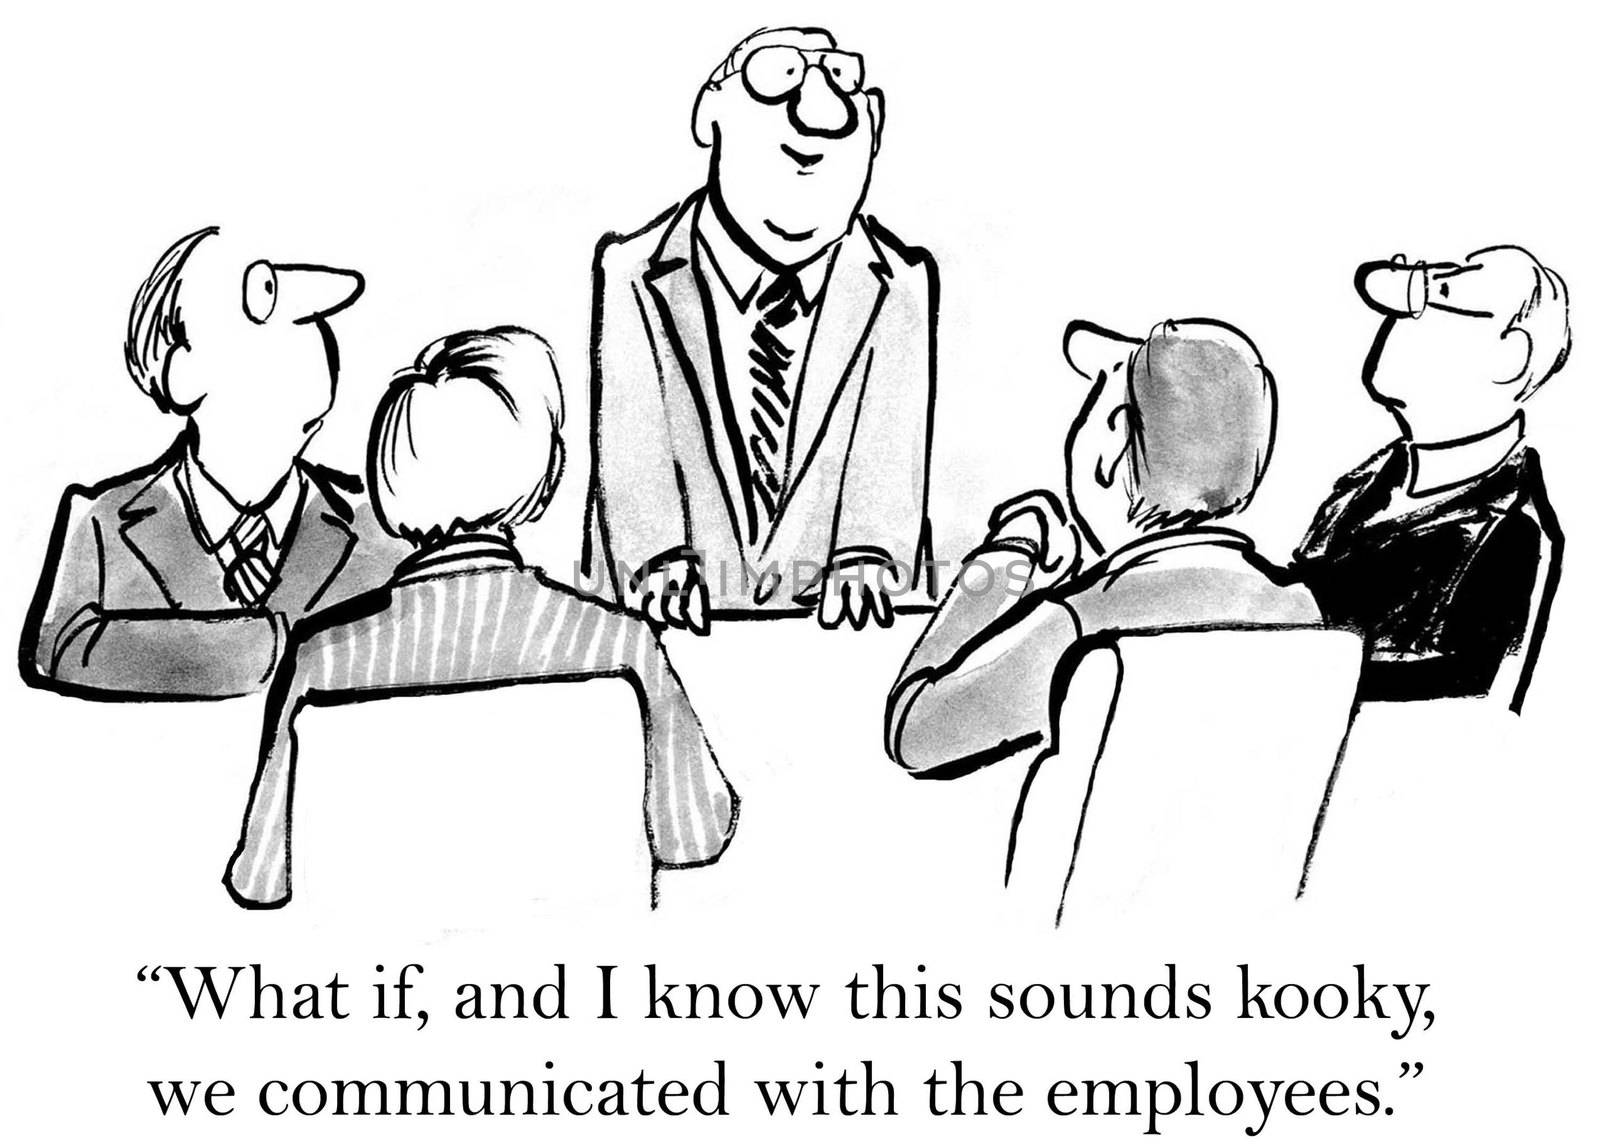 "What if, and I know this sounds kooky, we communicated with the employees."